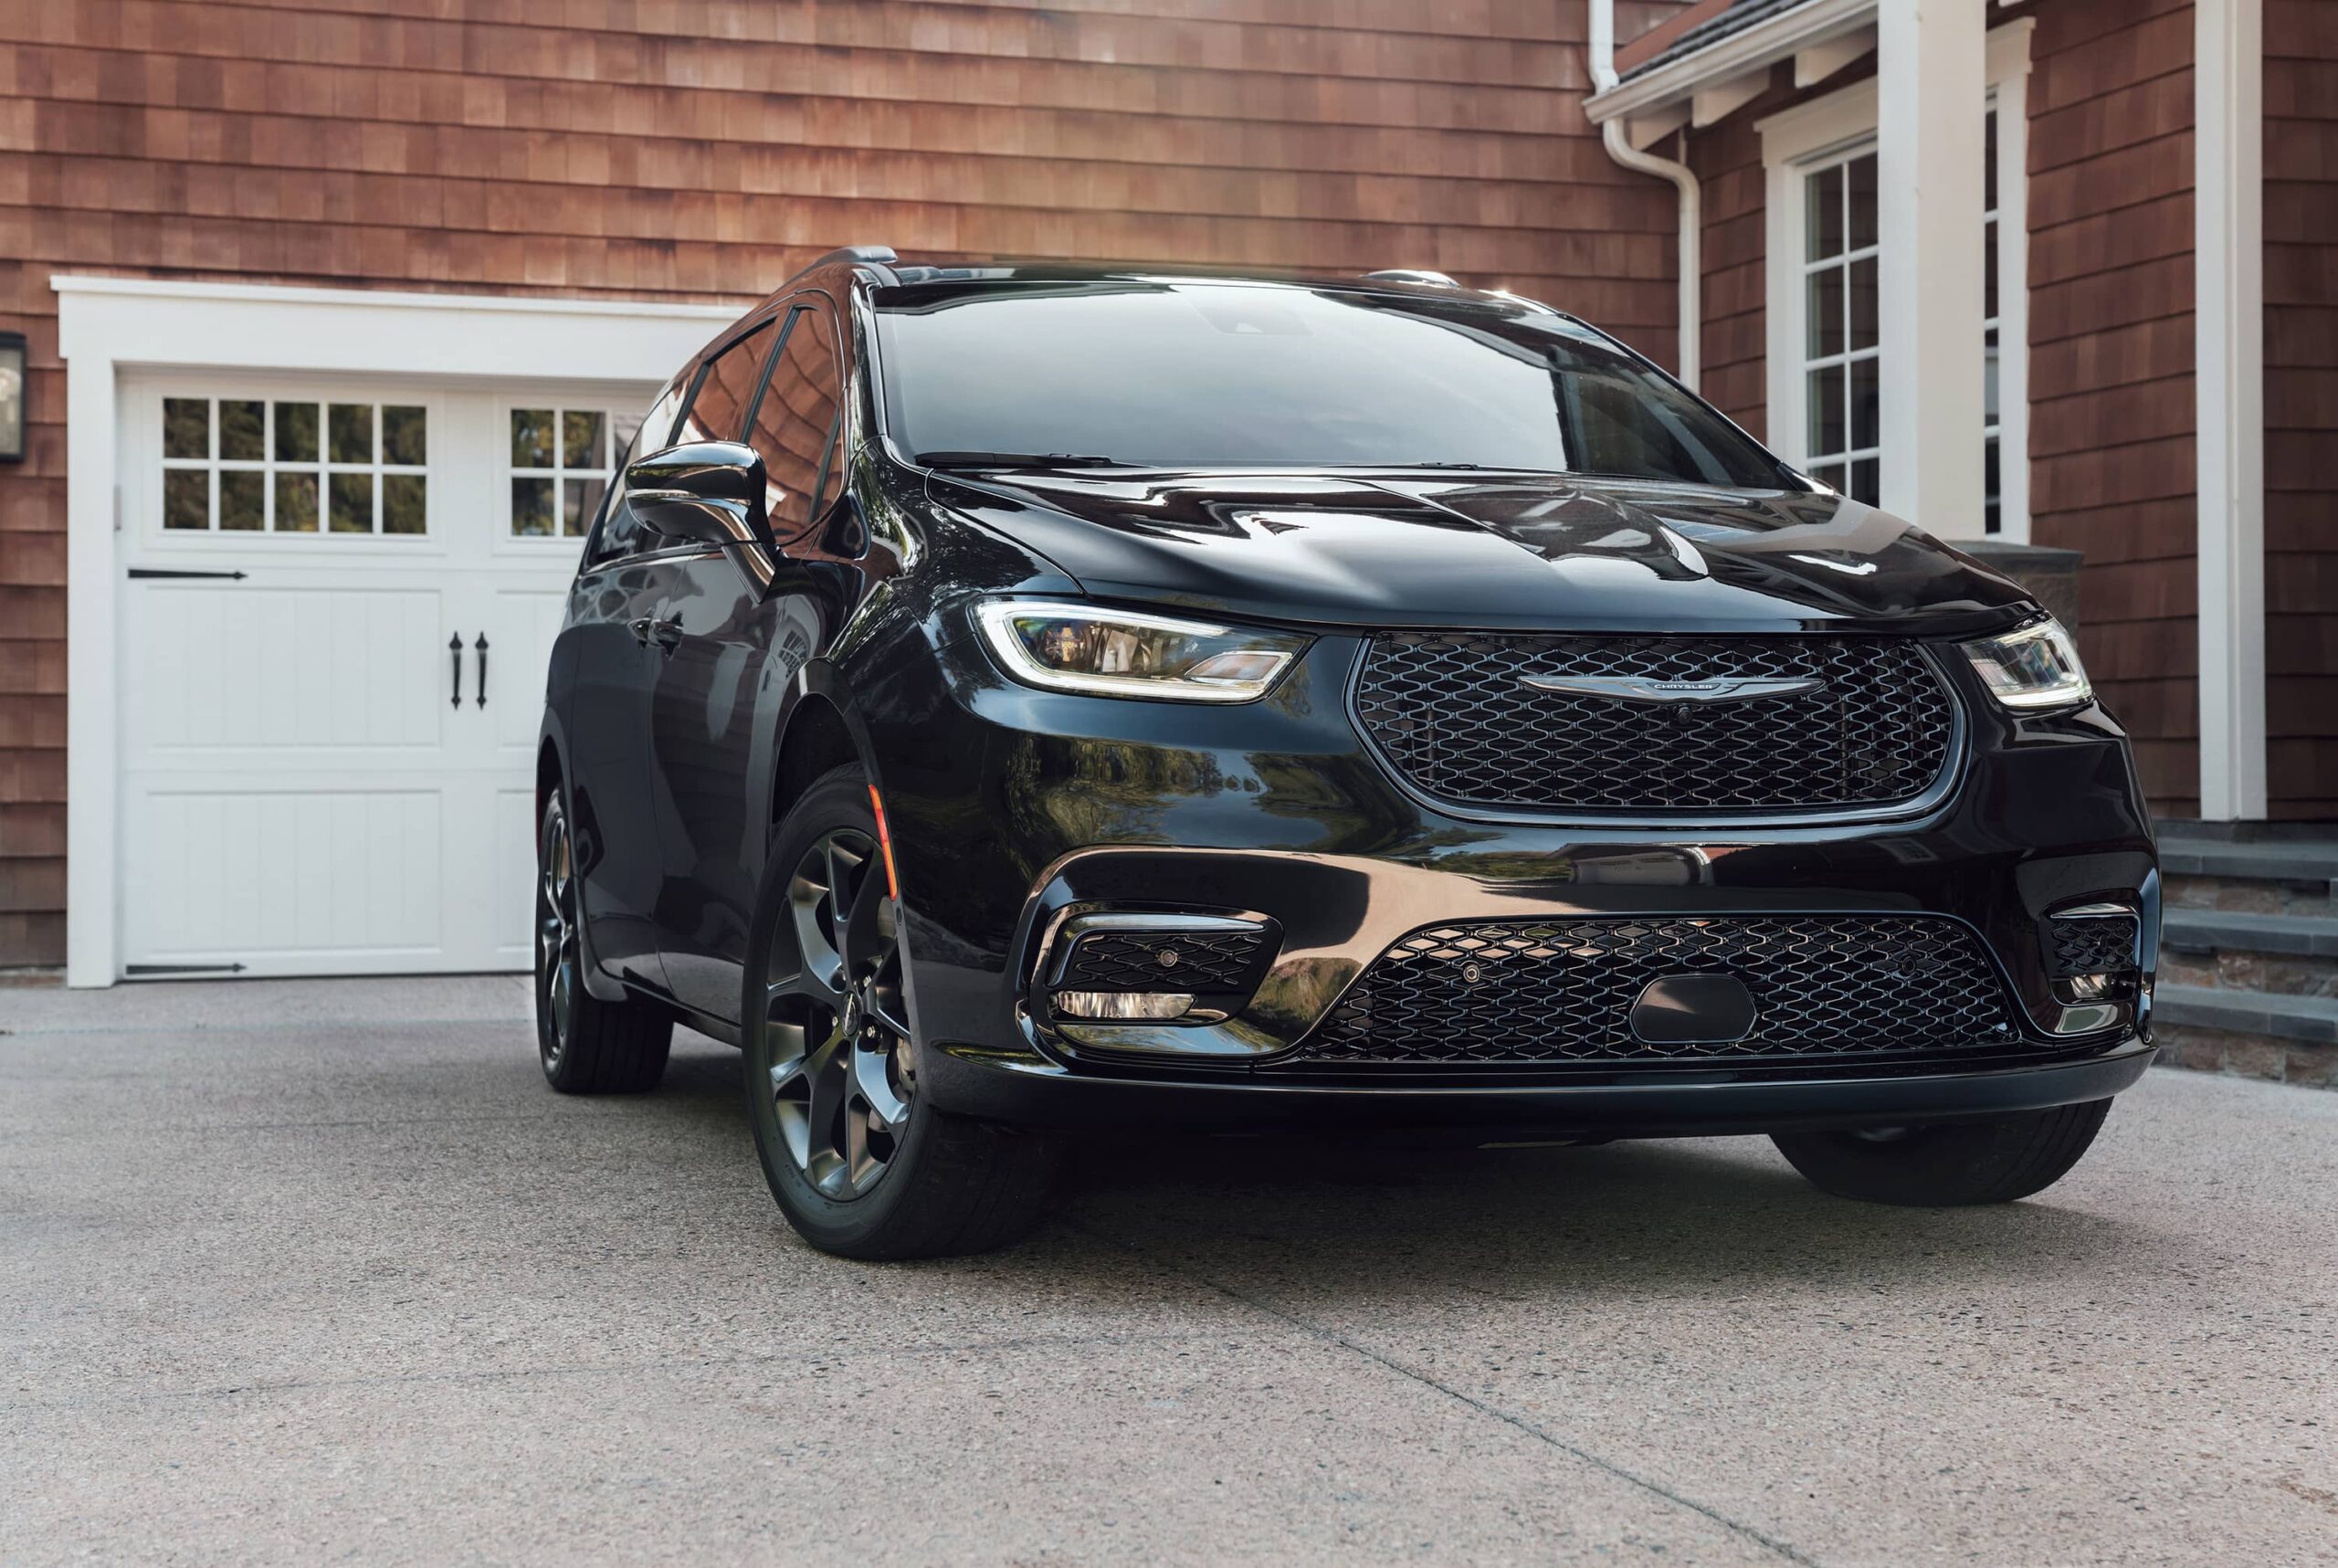 2022 Chrysler Pacifica – Everything You Need